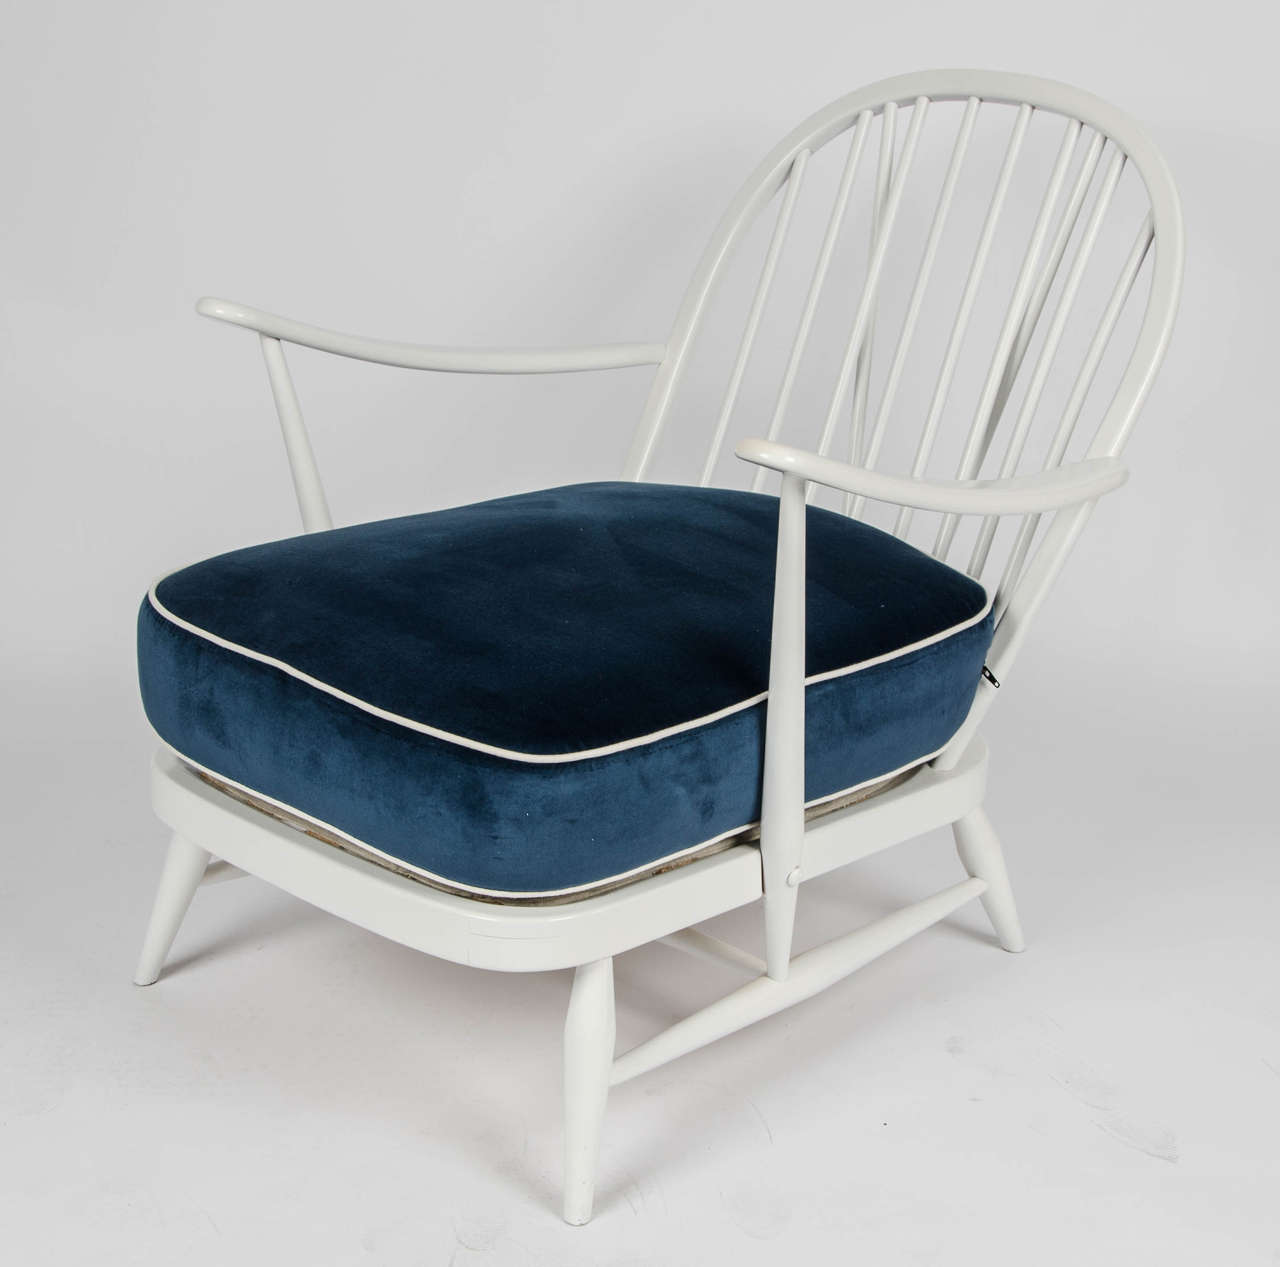 A fabulous vintage example of the 'Windsor' chair from the chair manufacturer Lucian Ercolani. Re-upholstered with high-quality blue velvet fabric.

By Lucian Ercolani.